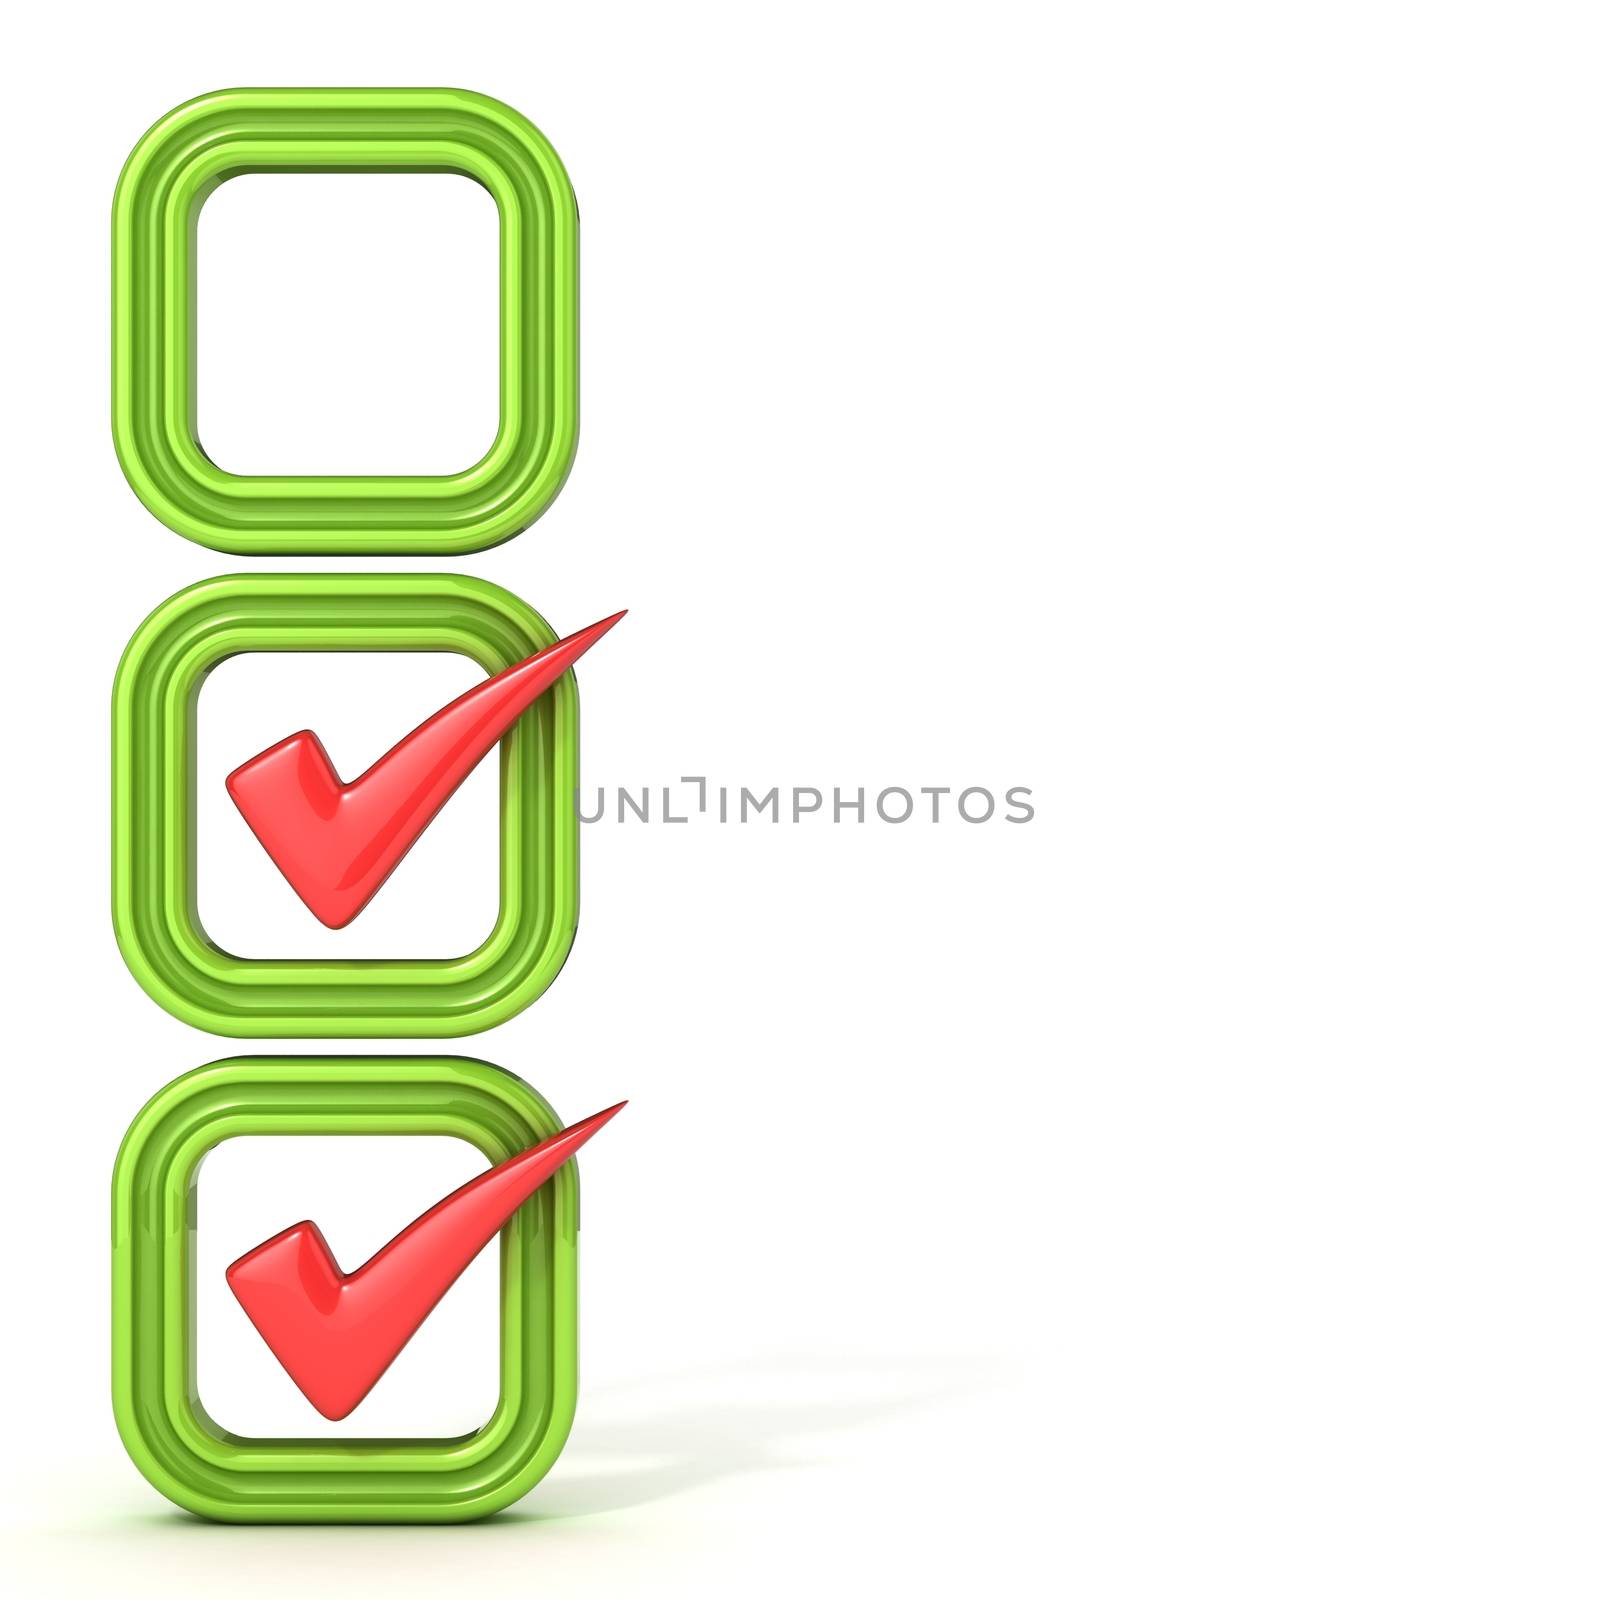 Check boxes with correct check mark. Isolated on white background.